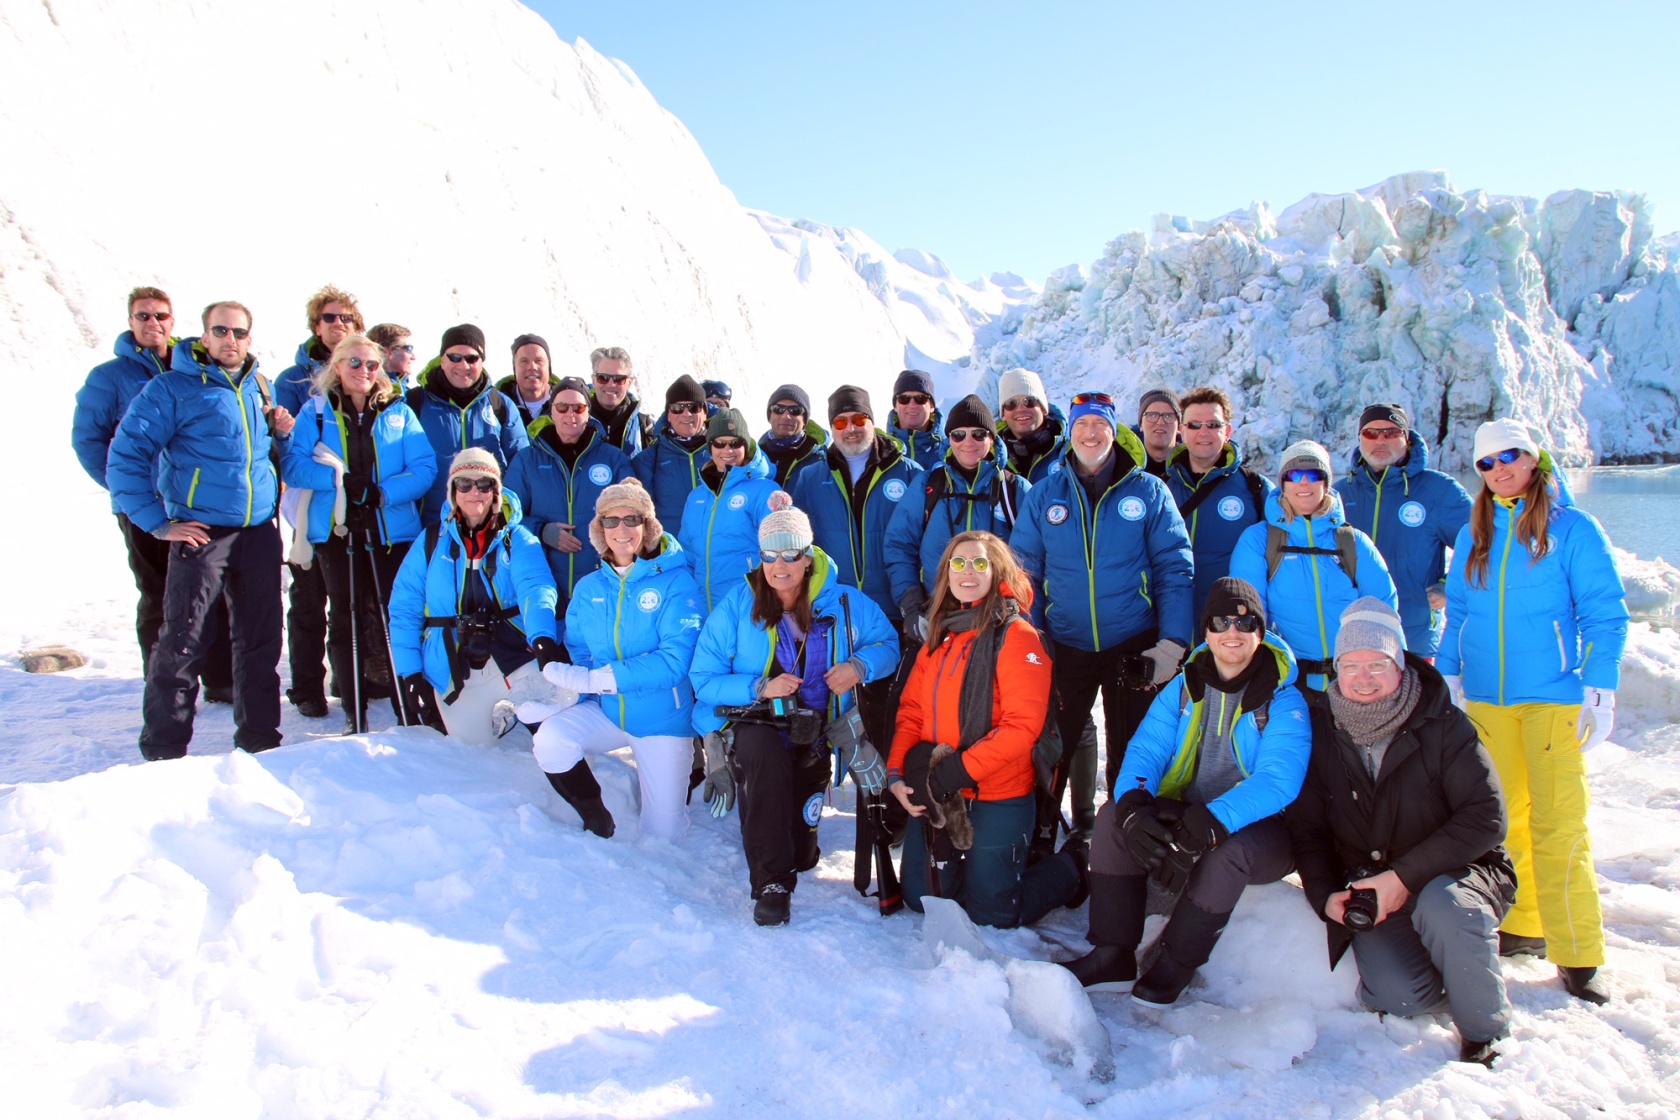 The Svalbard finance industry expedition in April 2018.